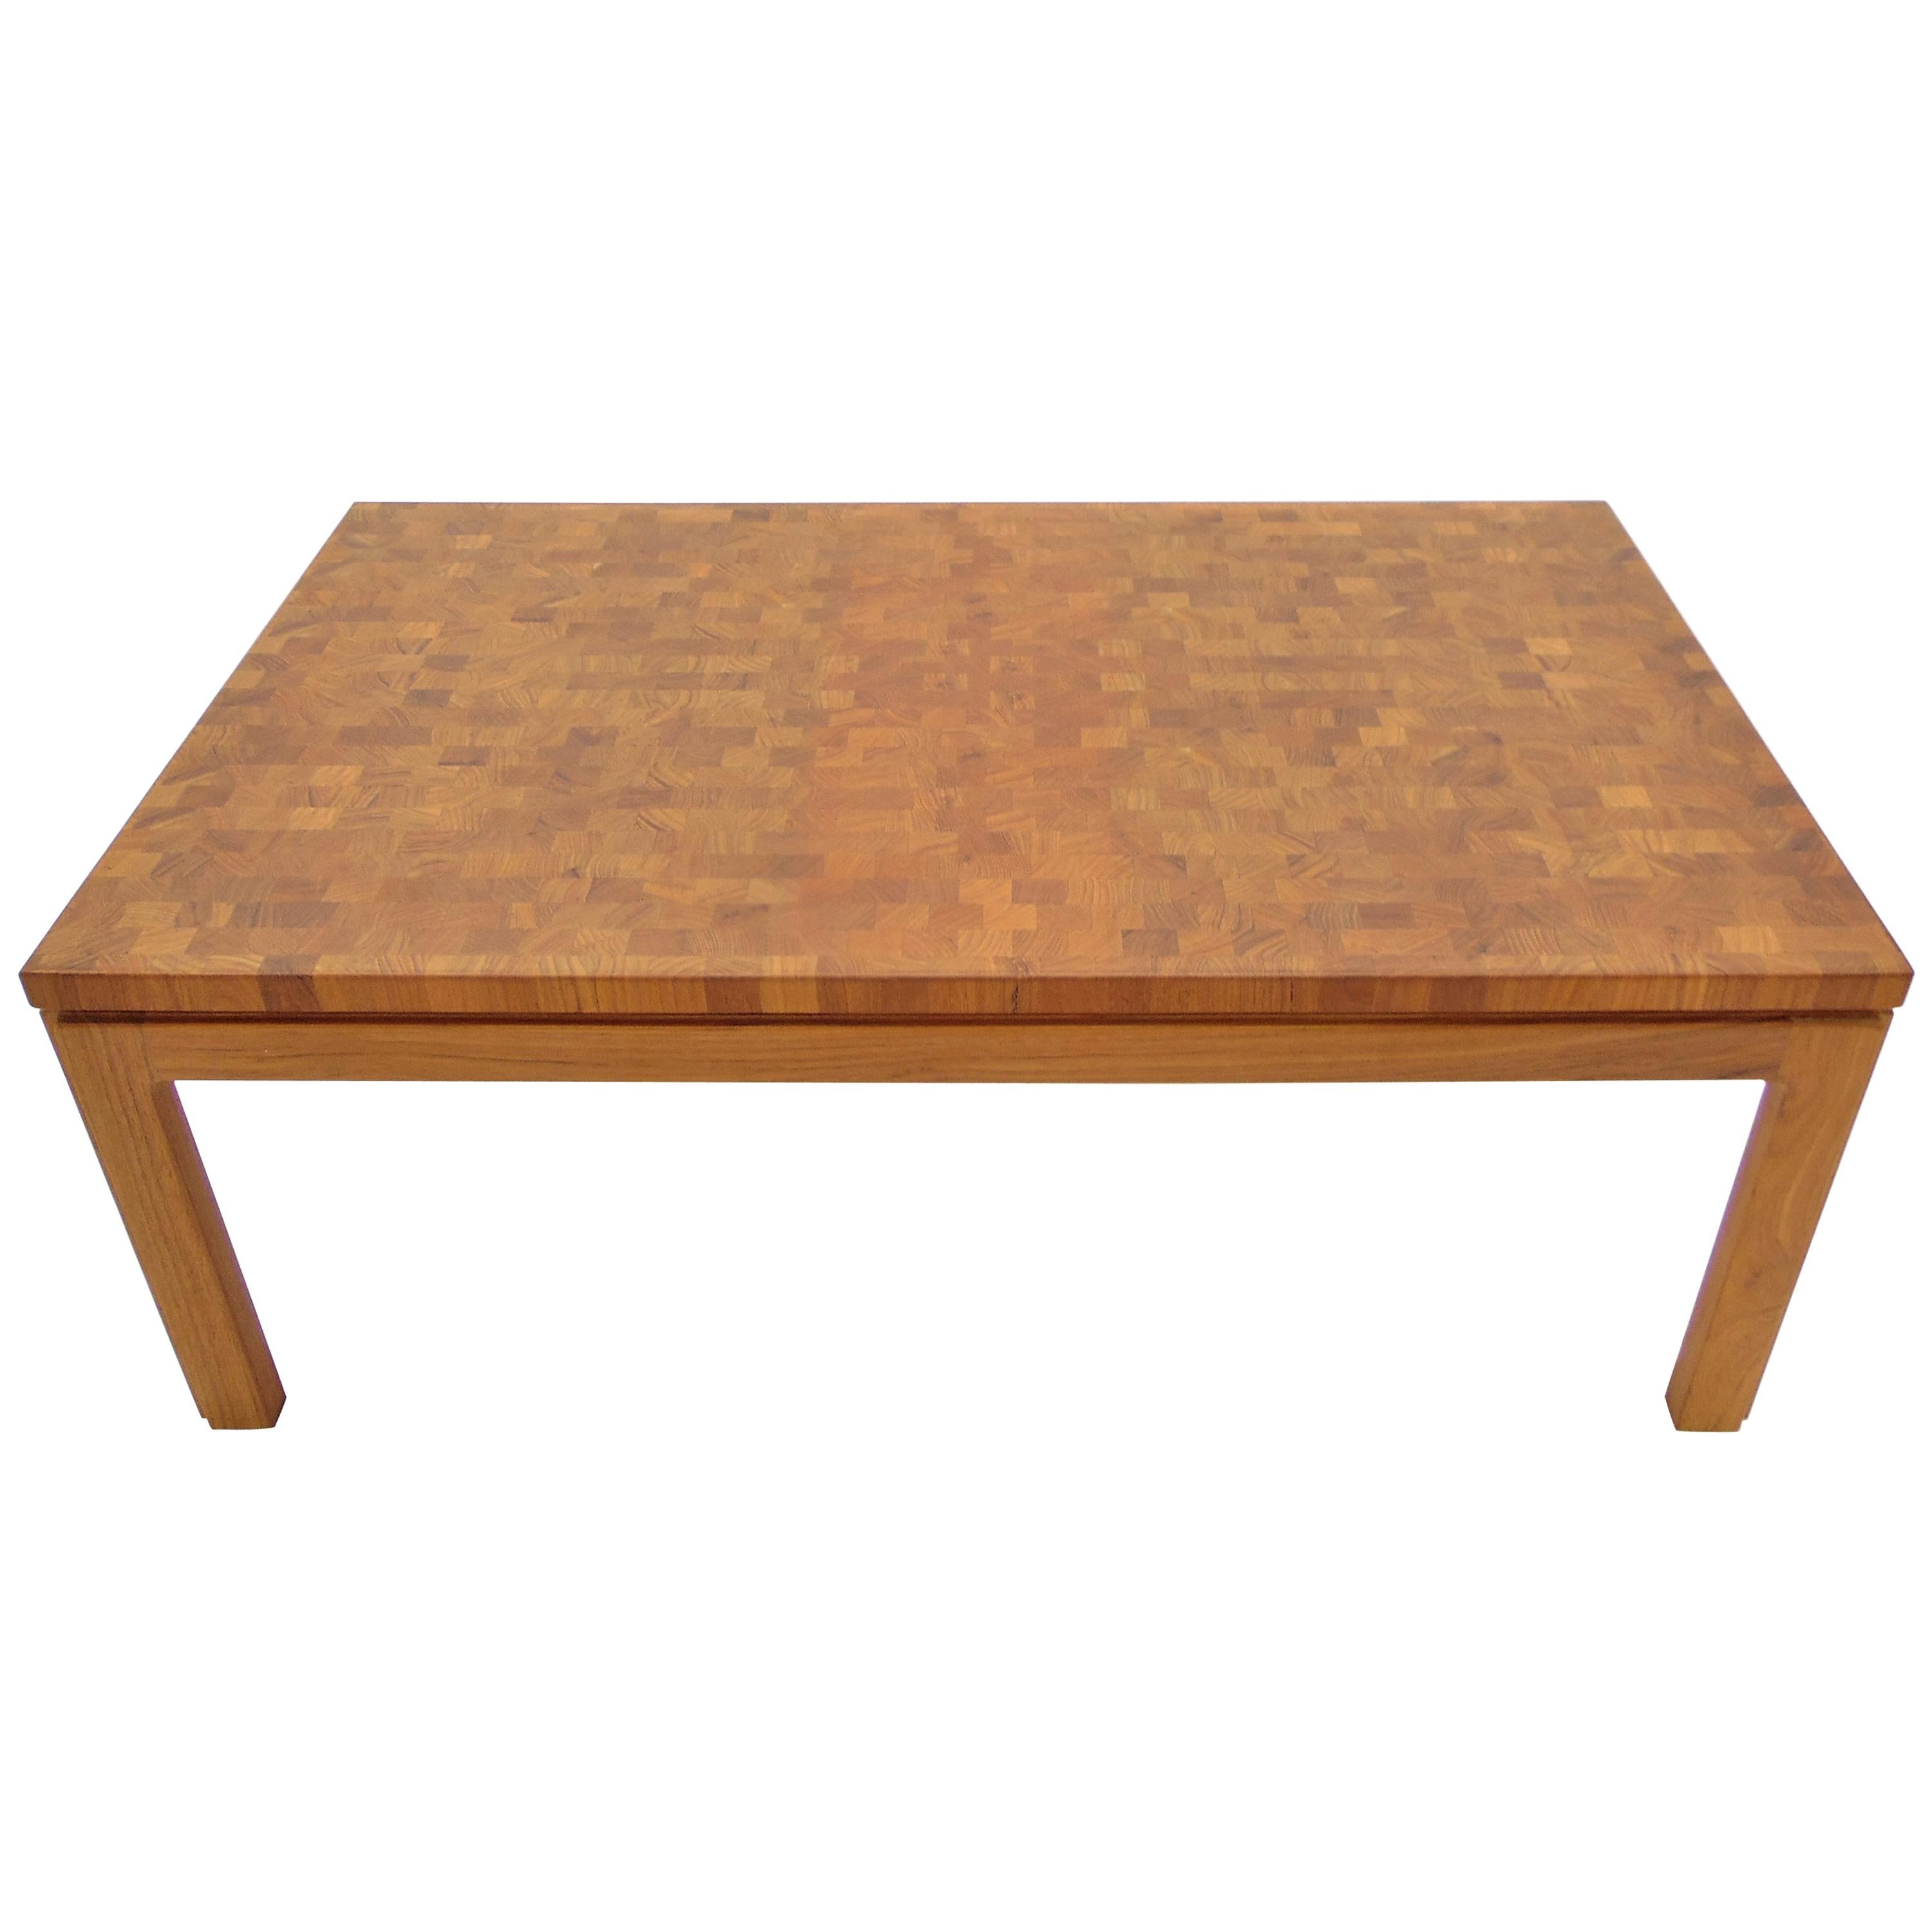 Parquet Vintage Midcentury Teak Coffee Table by Tarm Stole For Sale